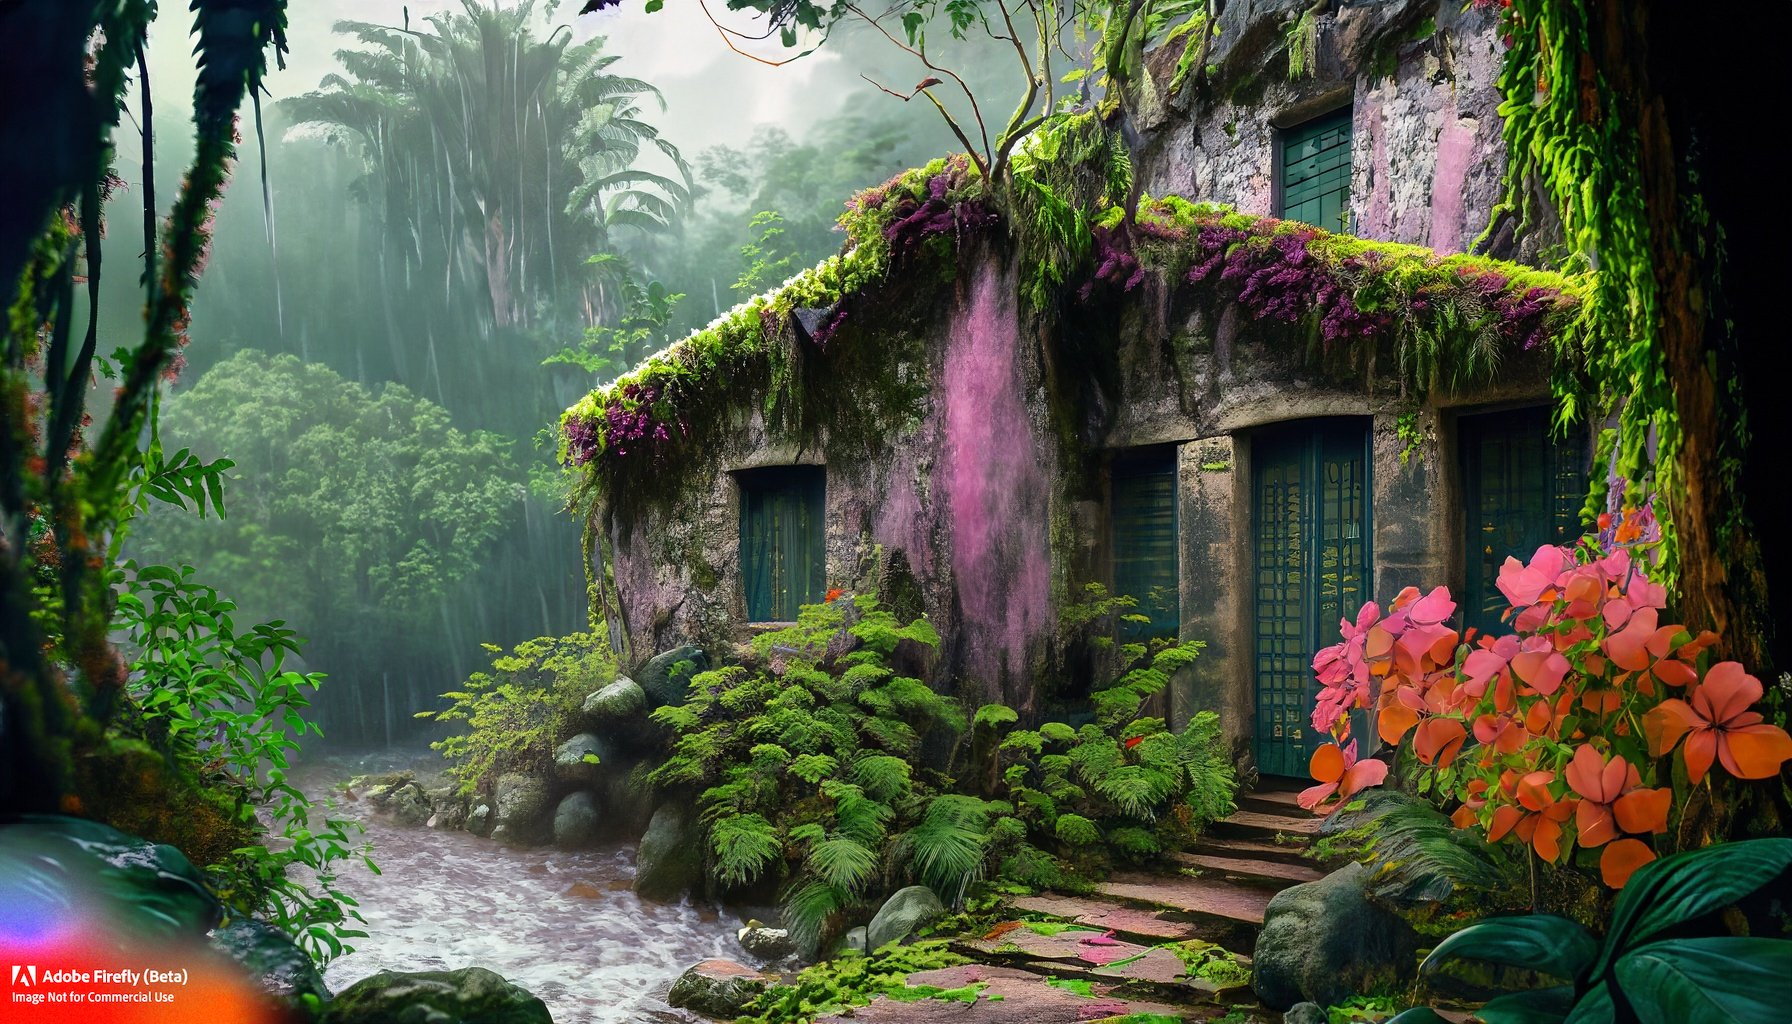 Firefly_A+tropical jungle, solid stone house with windows with storm shutters coated with green lichen. Climbing vines, flowers of pink, purple, orange. There's a gray stone pathway leading to a stream. .jpg